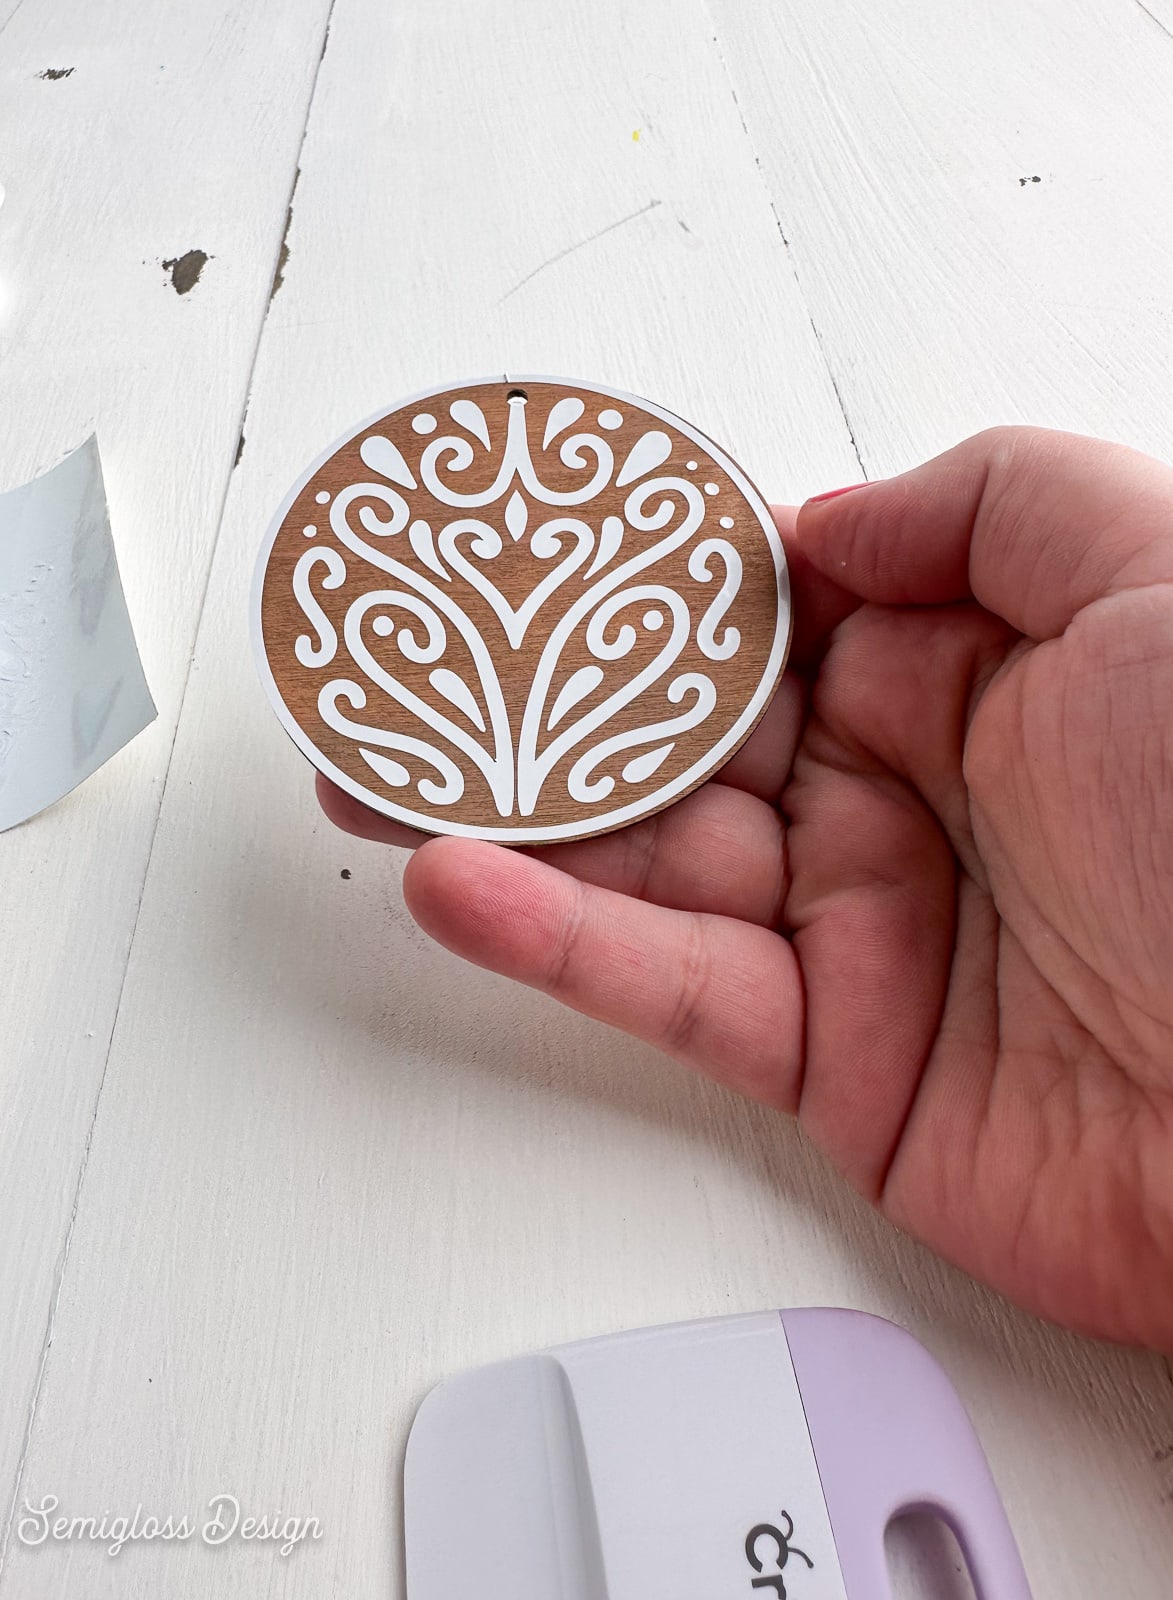 vinyl on ornament to resemble cookie icing